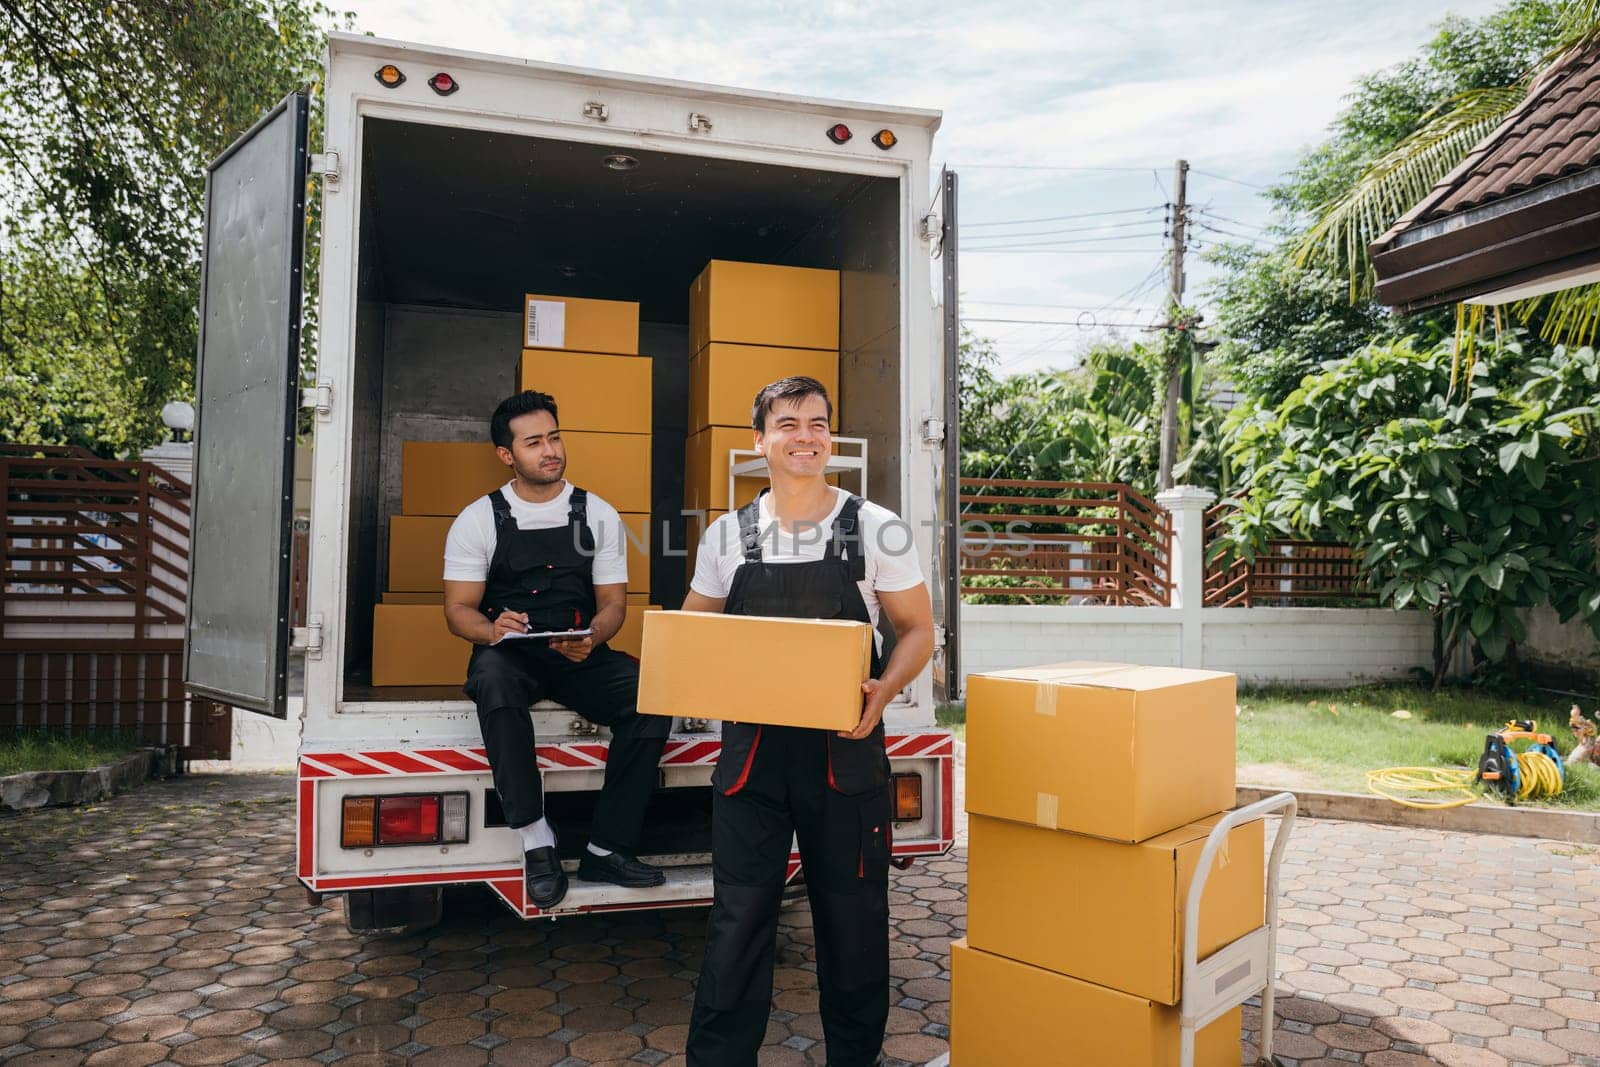 Workers unload cardboard boxes from a van. Movers work together in a relocation service. Cooperation among colleagues. Smiling employees carrying orders. relocation cooperation Moving Day